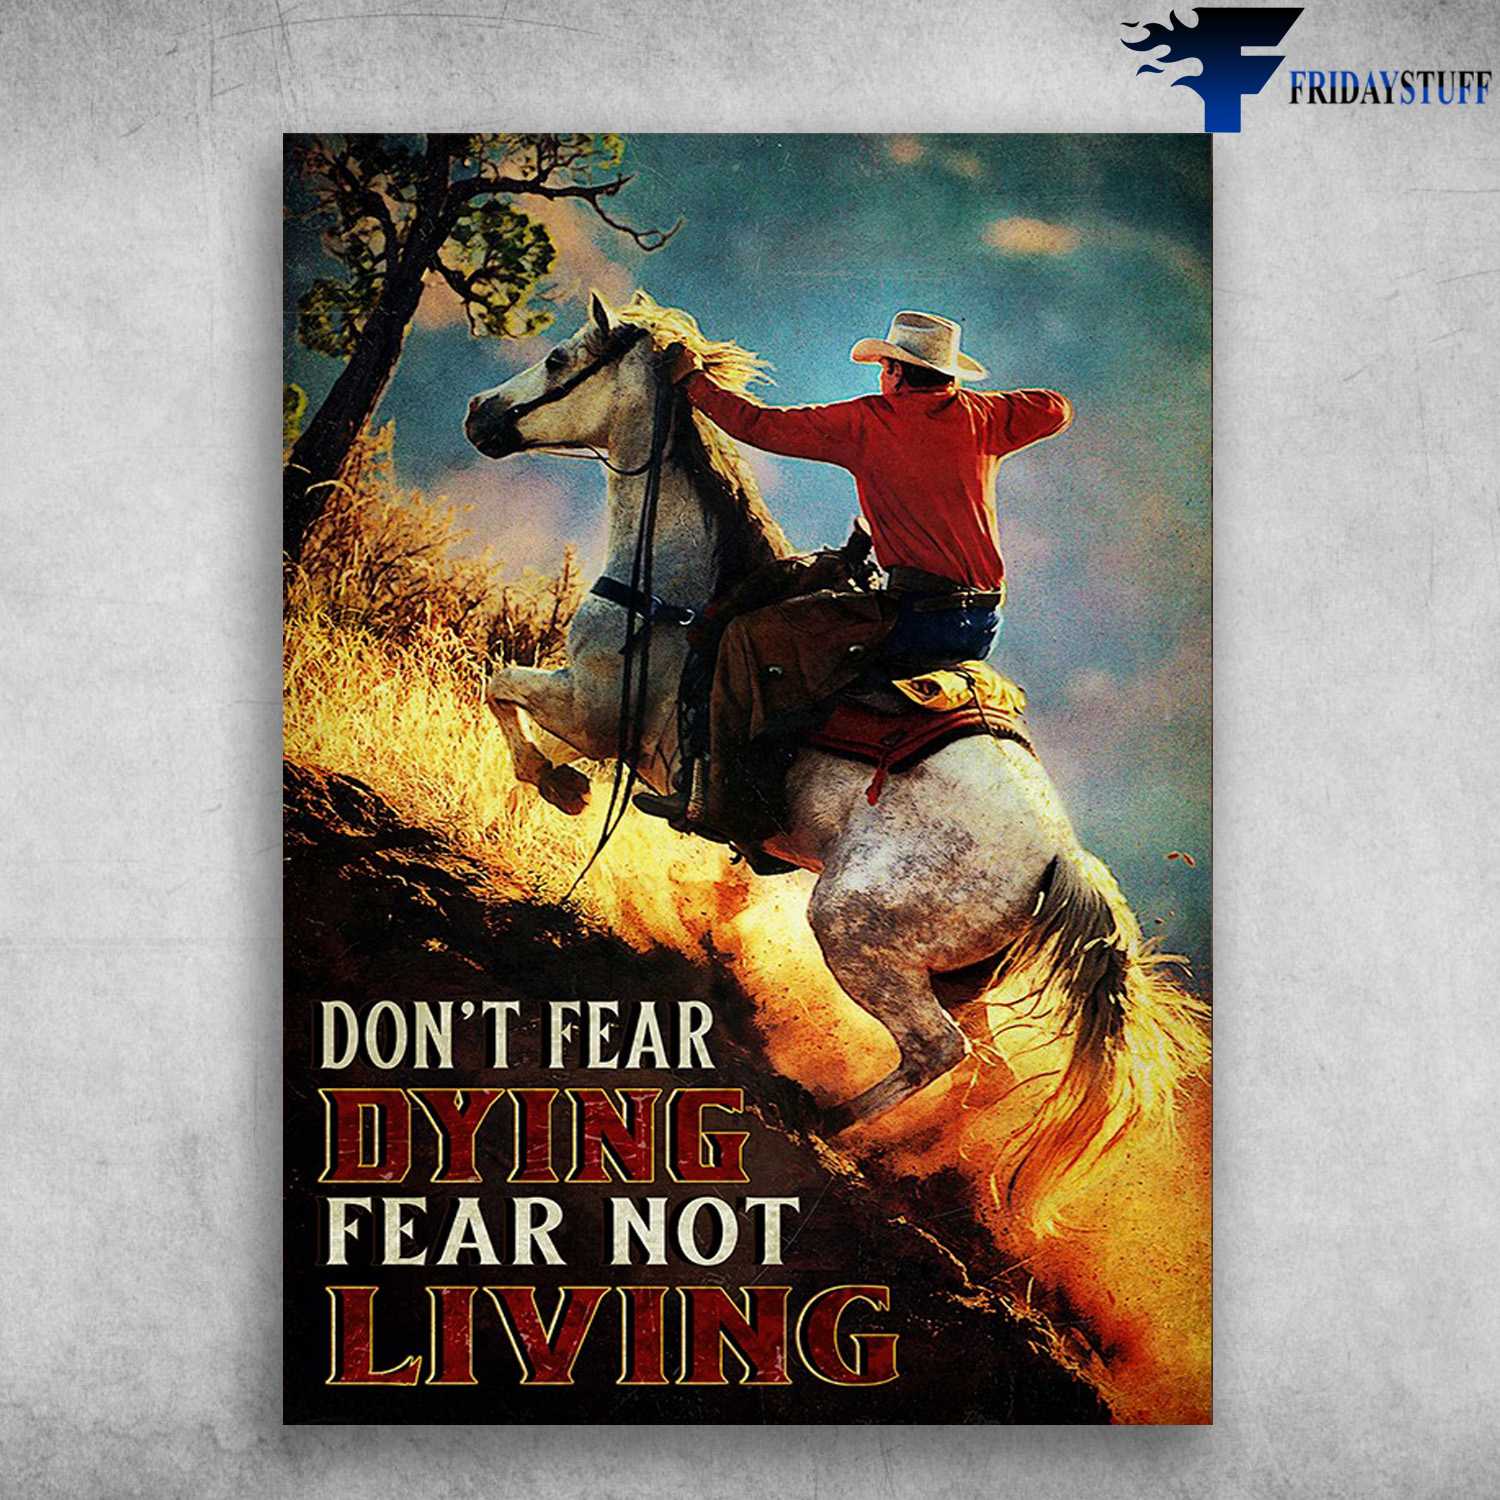 Cowboy Riding Horse - Don't Fear Dying, Fear Not Living